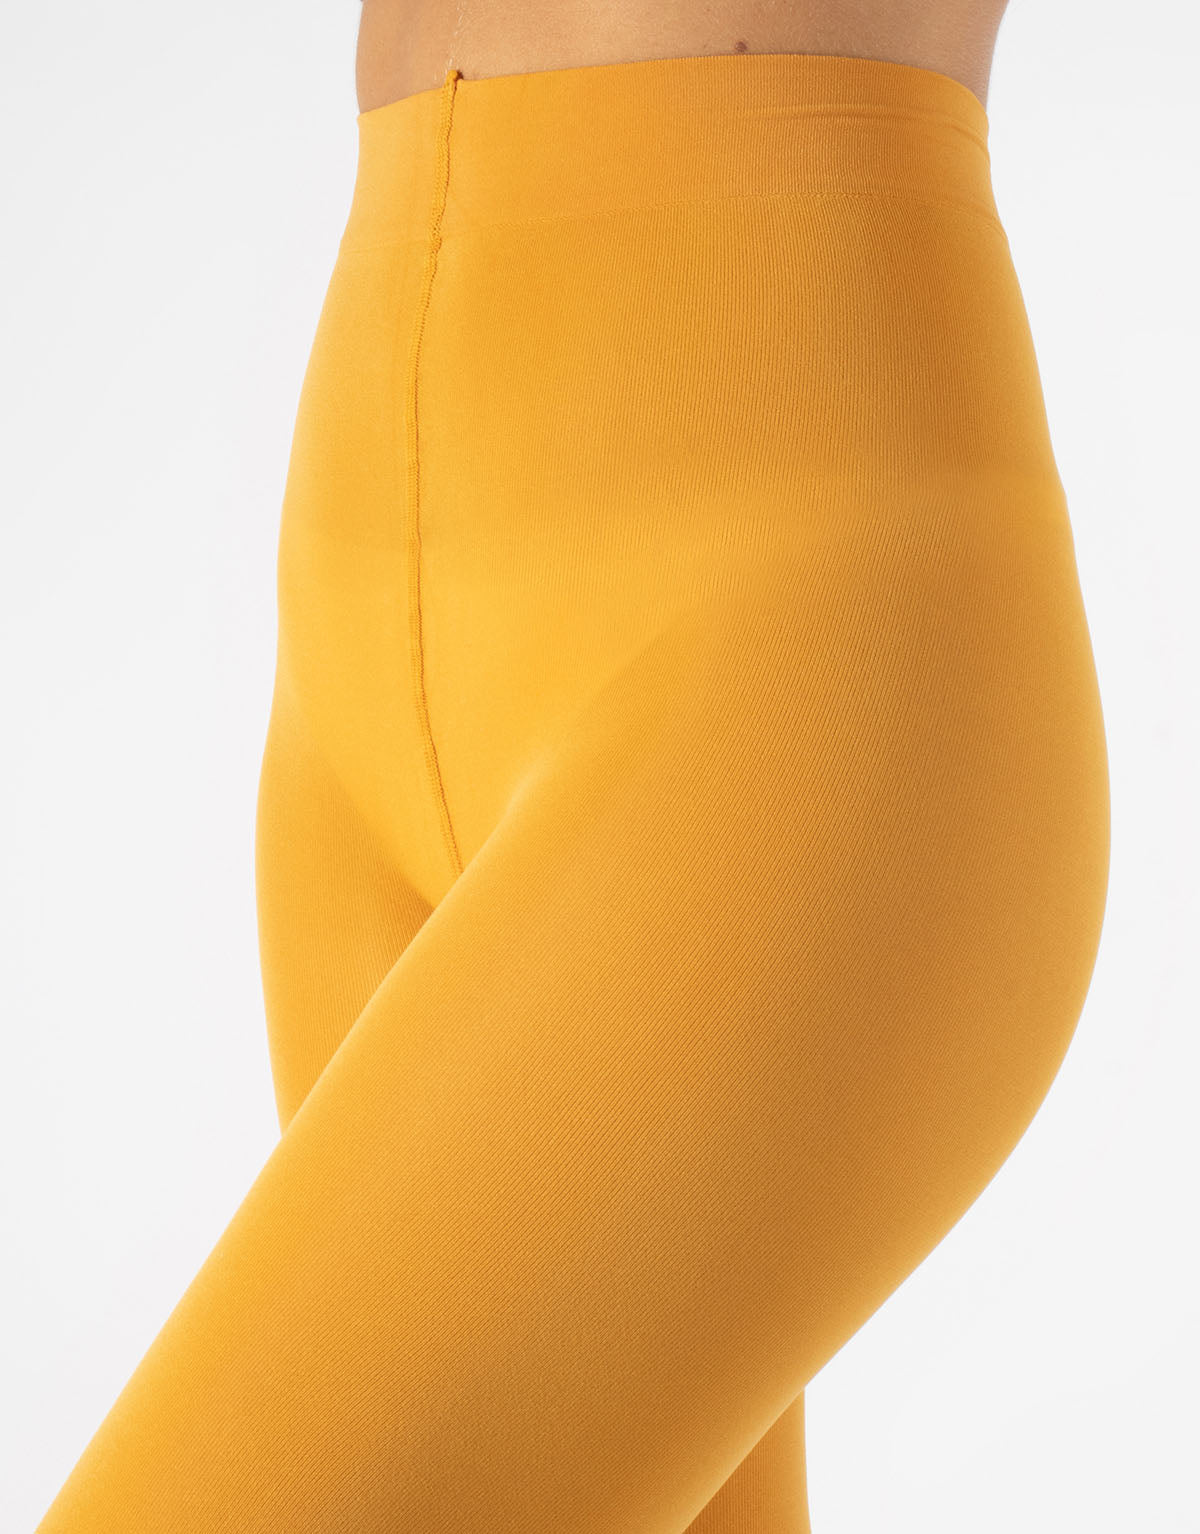 Calzitaly 80 Den Footless Tights - Plain mustard yellow (ocra) matte opaque footless tights with flat seams and cotton gusset.